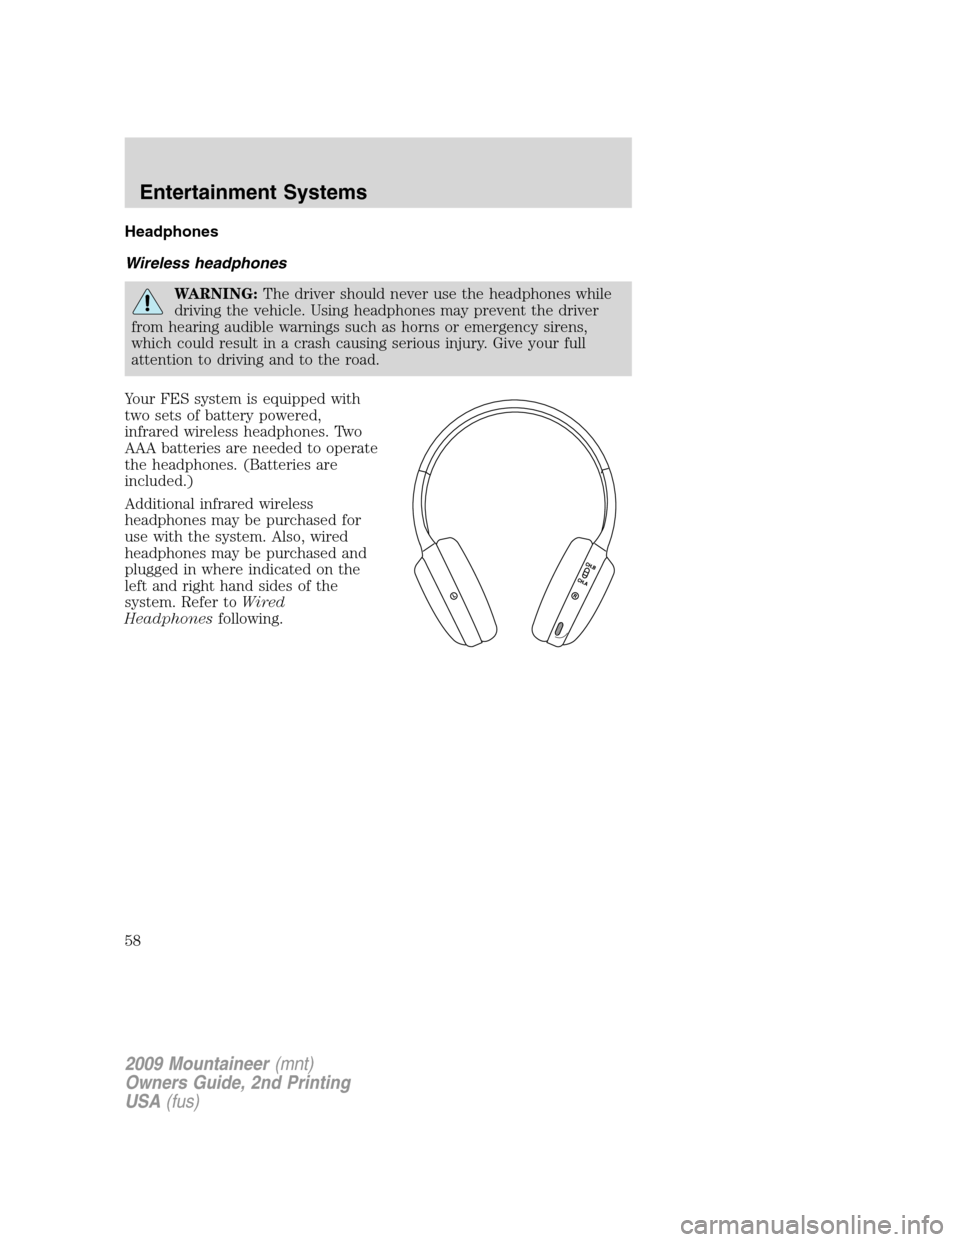 Mercury Mountaineer 2009  Owners Manuals Headphones
Wireless headphones
WARNING:The driver should never use the headphones while
driving the vehicle. Using headphones may prevent the driver
from hearing audible warnings such as horns or emer